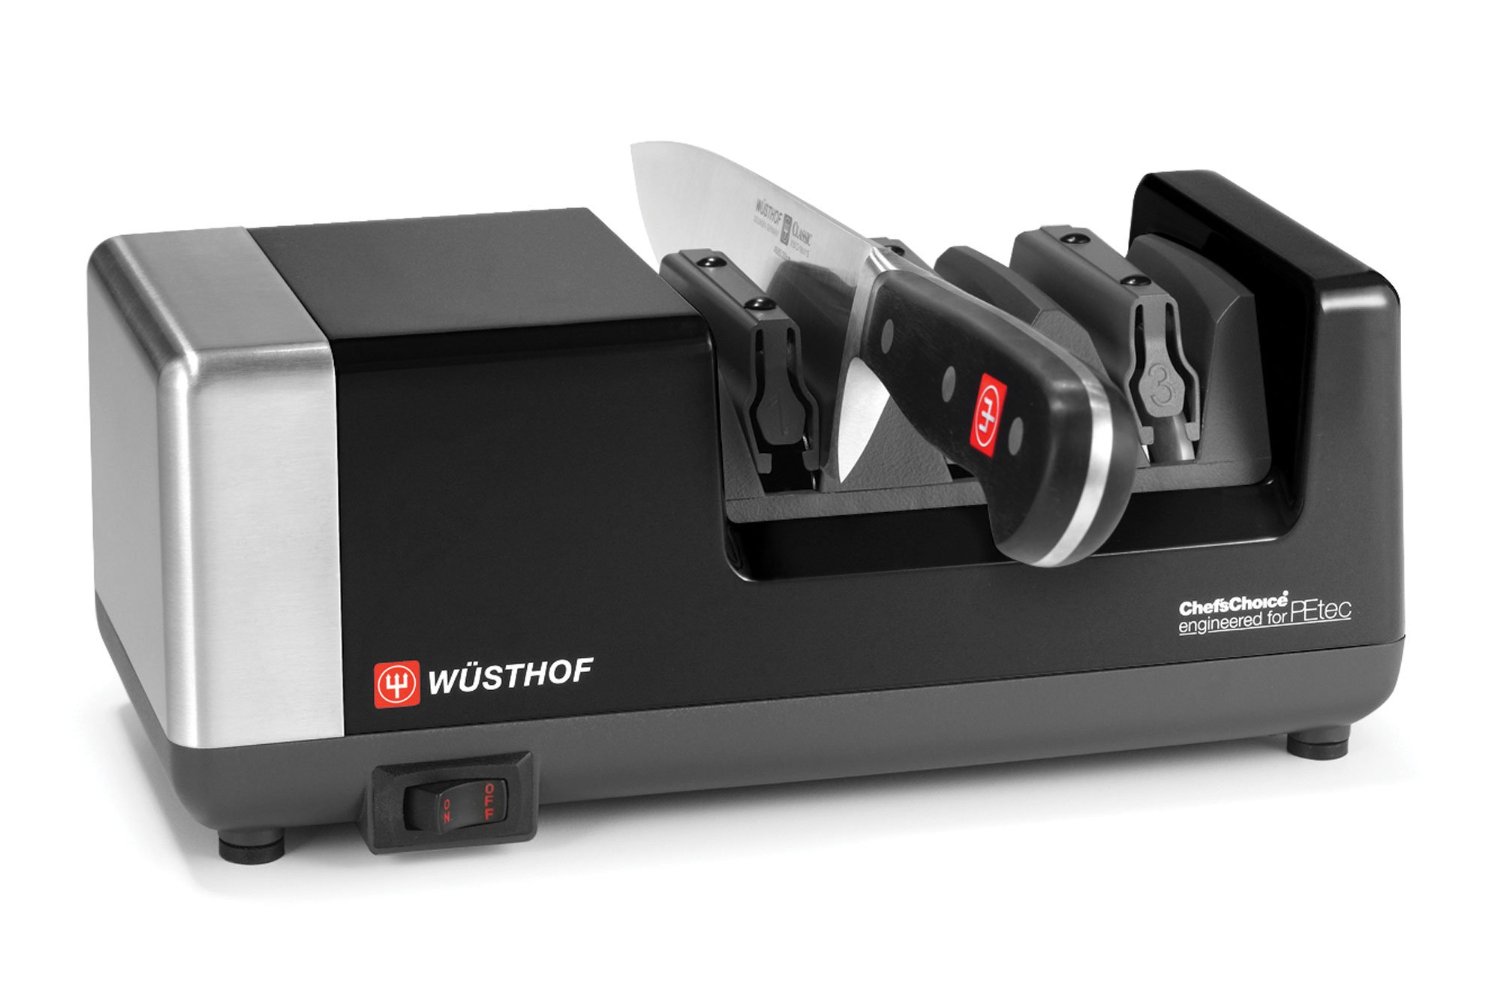 Wusthof Electric Knife Sharpener: A Joint Collaboration With Chef's Choice